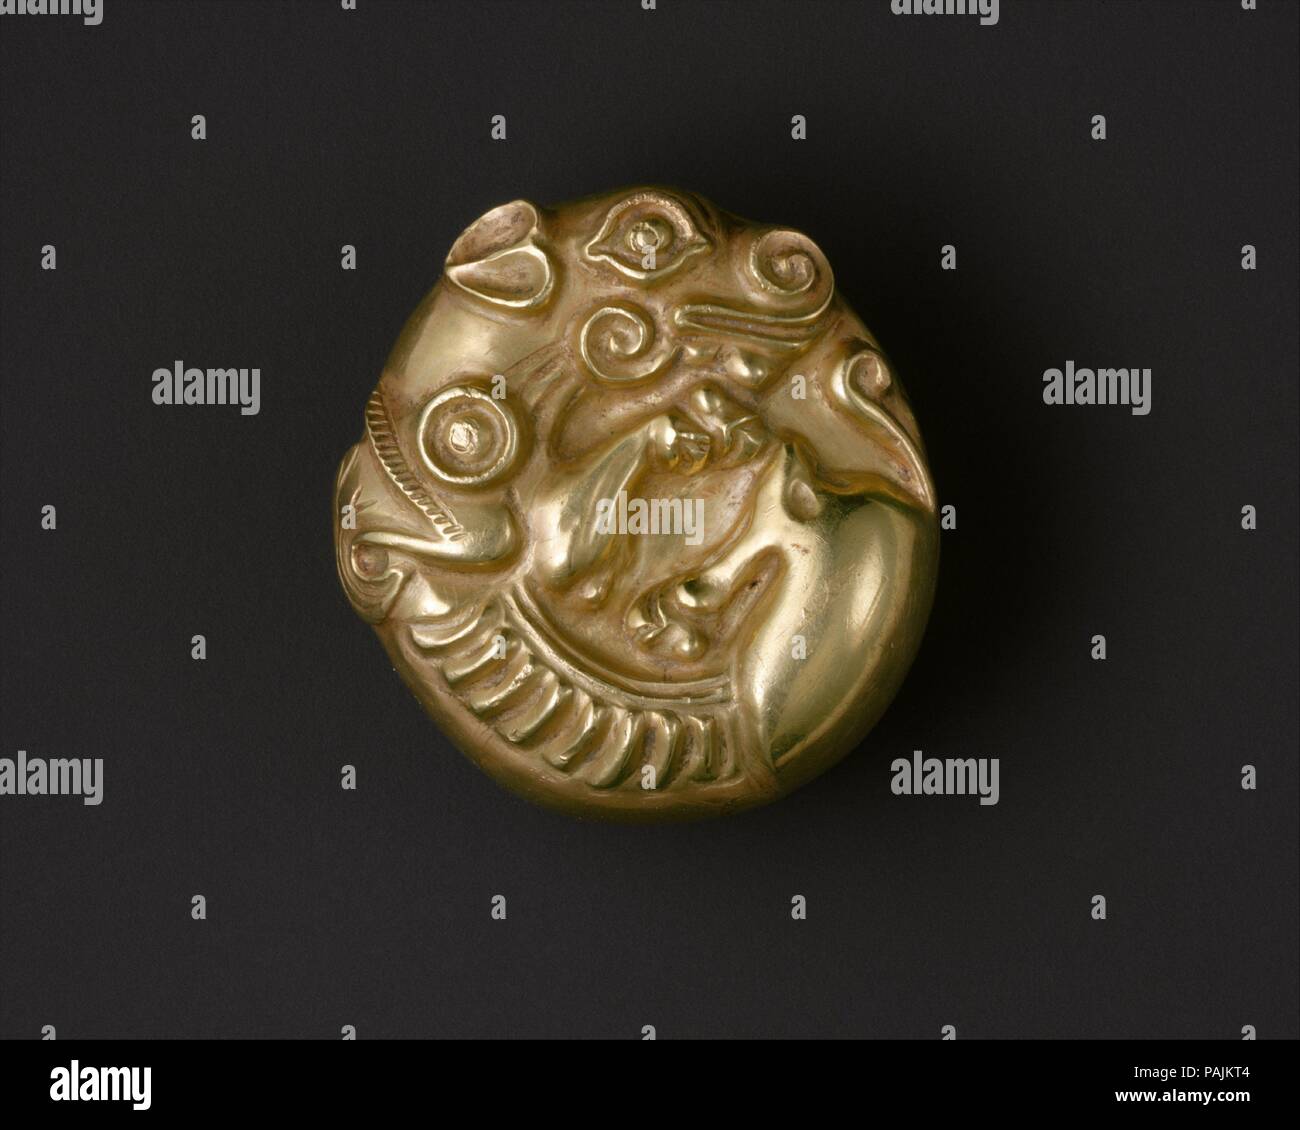 Pommel in the shape of coiled animals. Culture: Scythian. Dimensions: 0.91 x 1.57 in. (2.31 x 3.99 cm). Date: ca. 6th century B.C.. Museum: Metropolitan Museum of Art, New York, USA. Stock Photo